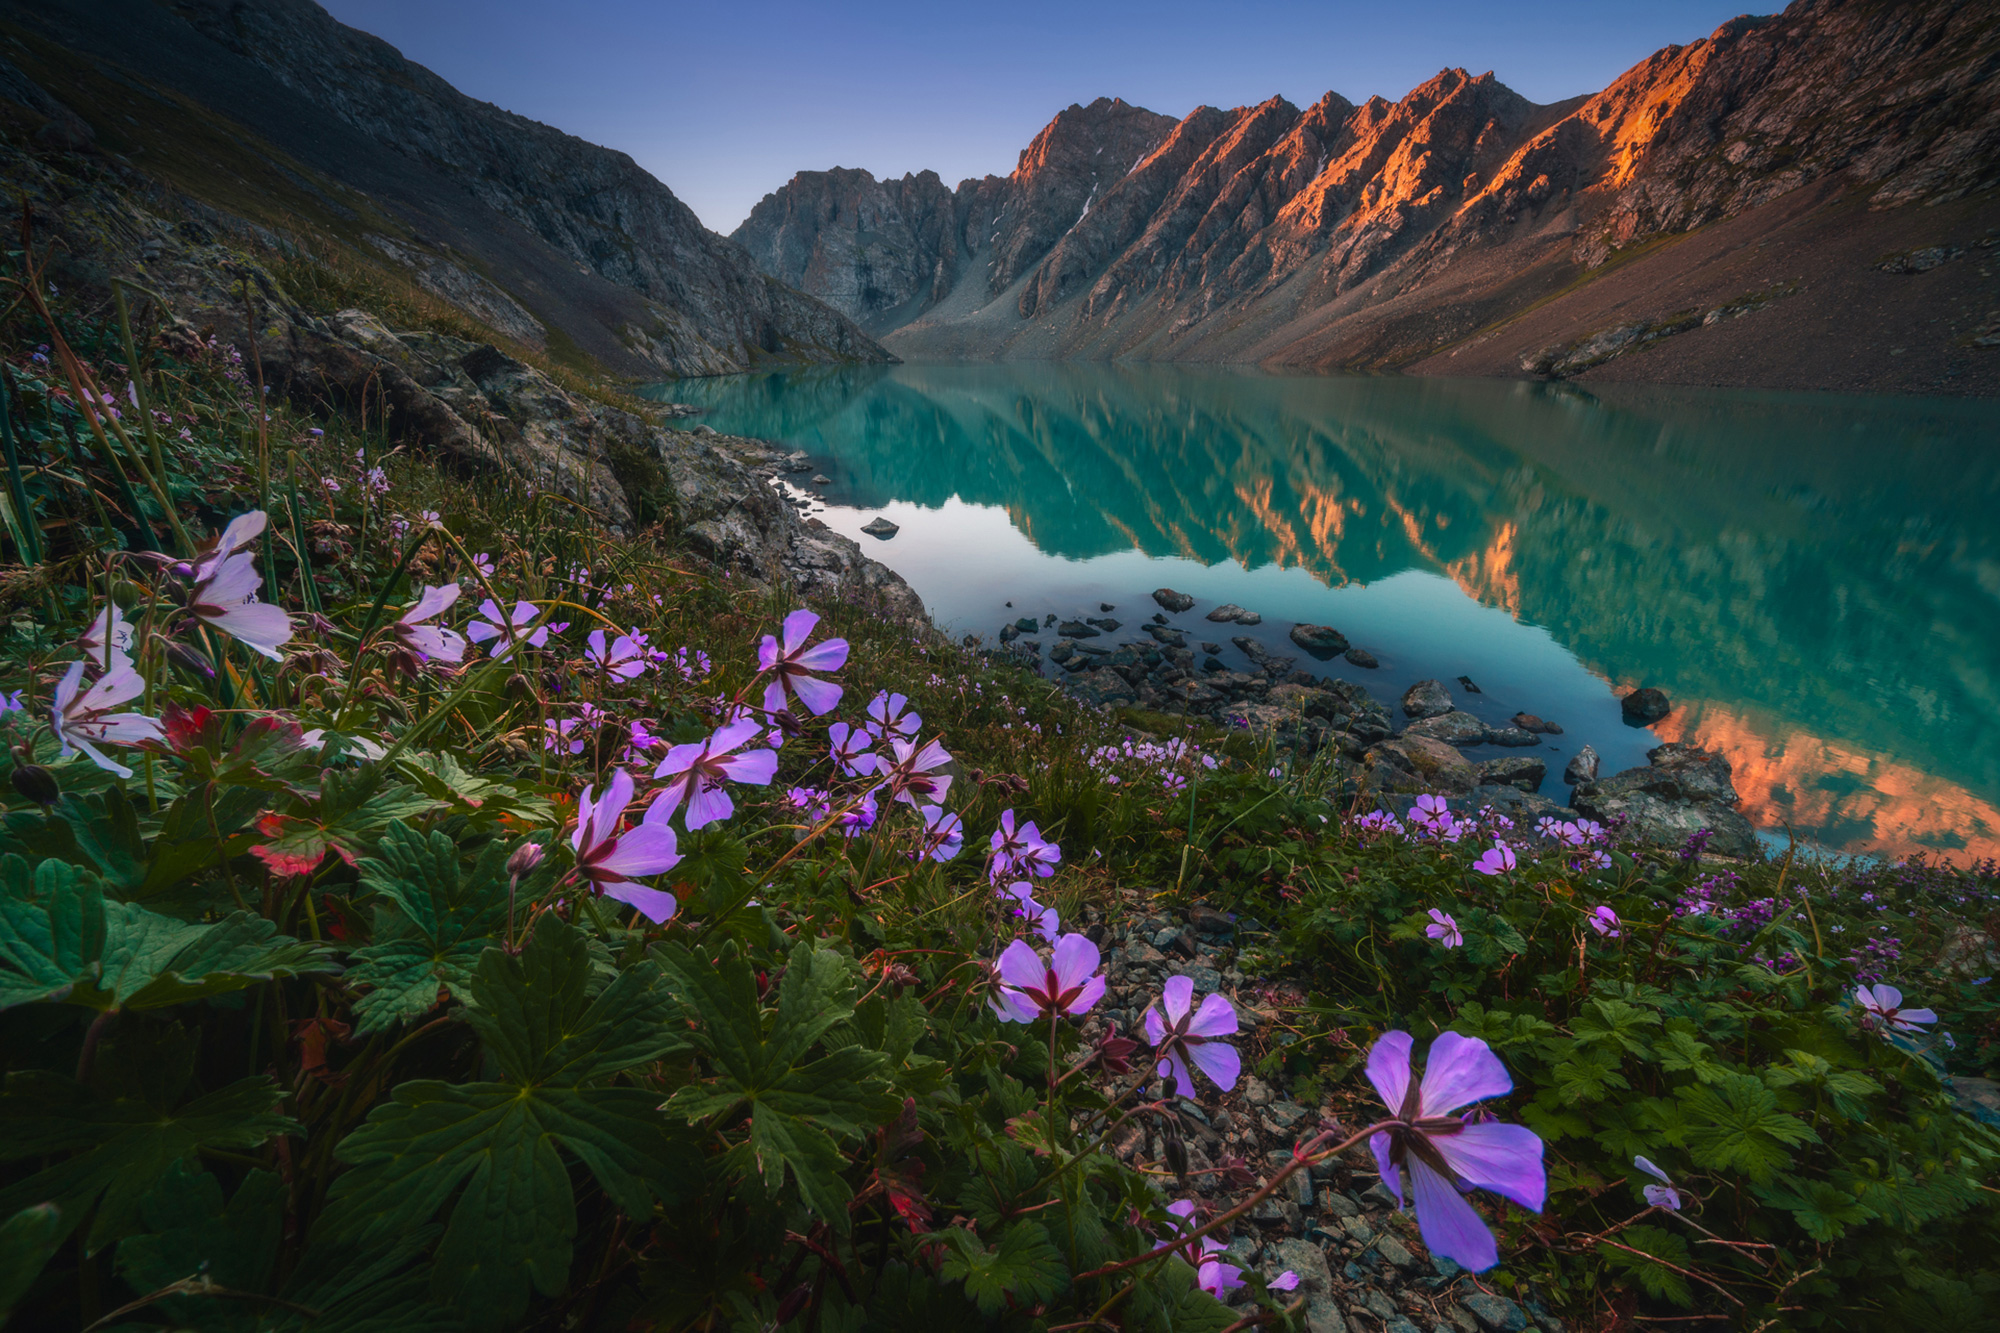 albert-dros-sony-alpha-7RIII-distant-mountains-reflected-in-a-still-lake-with-purple-flowers-in-the-foreground.jpeg